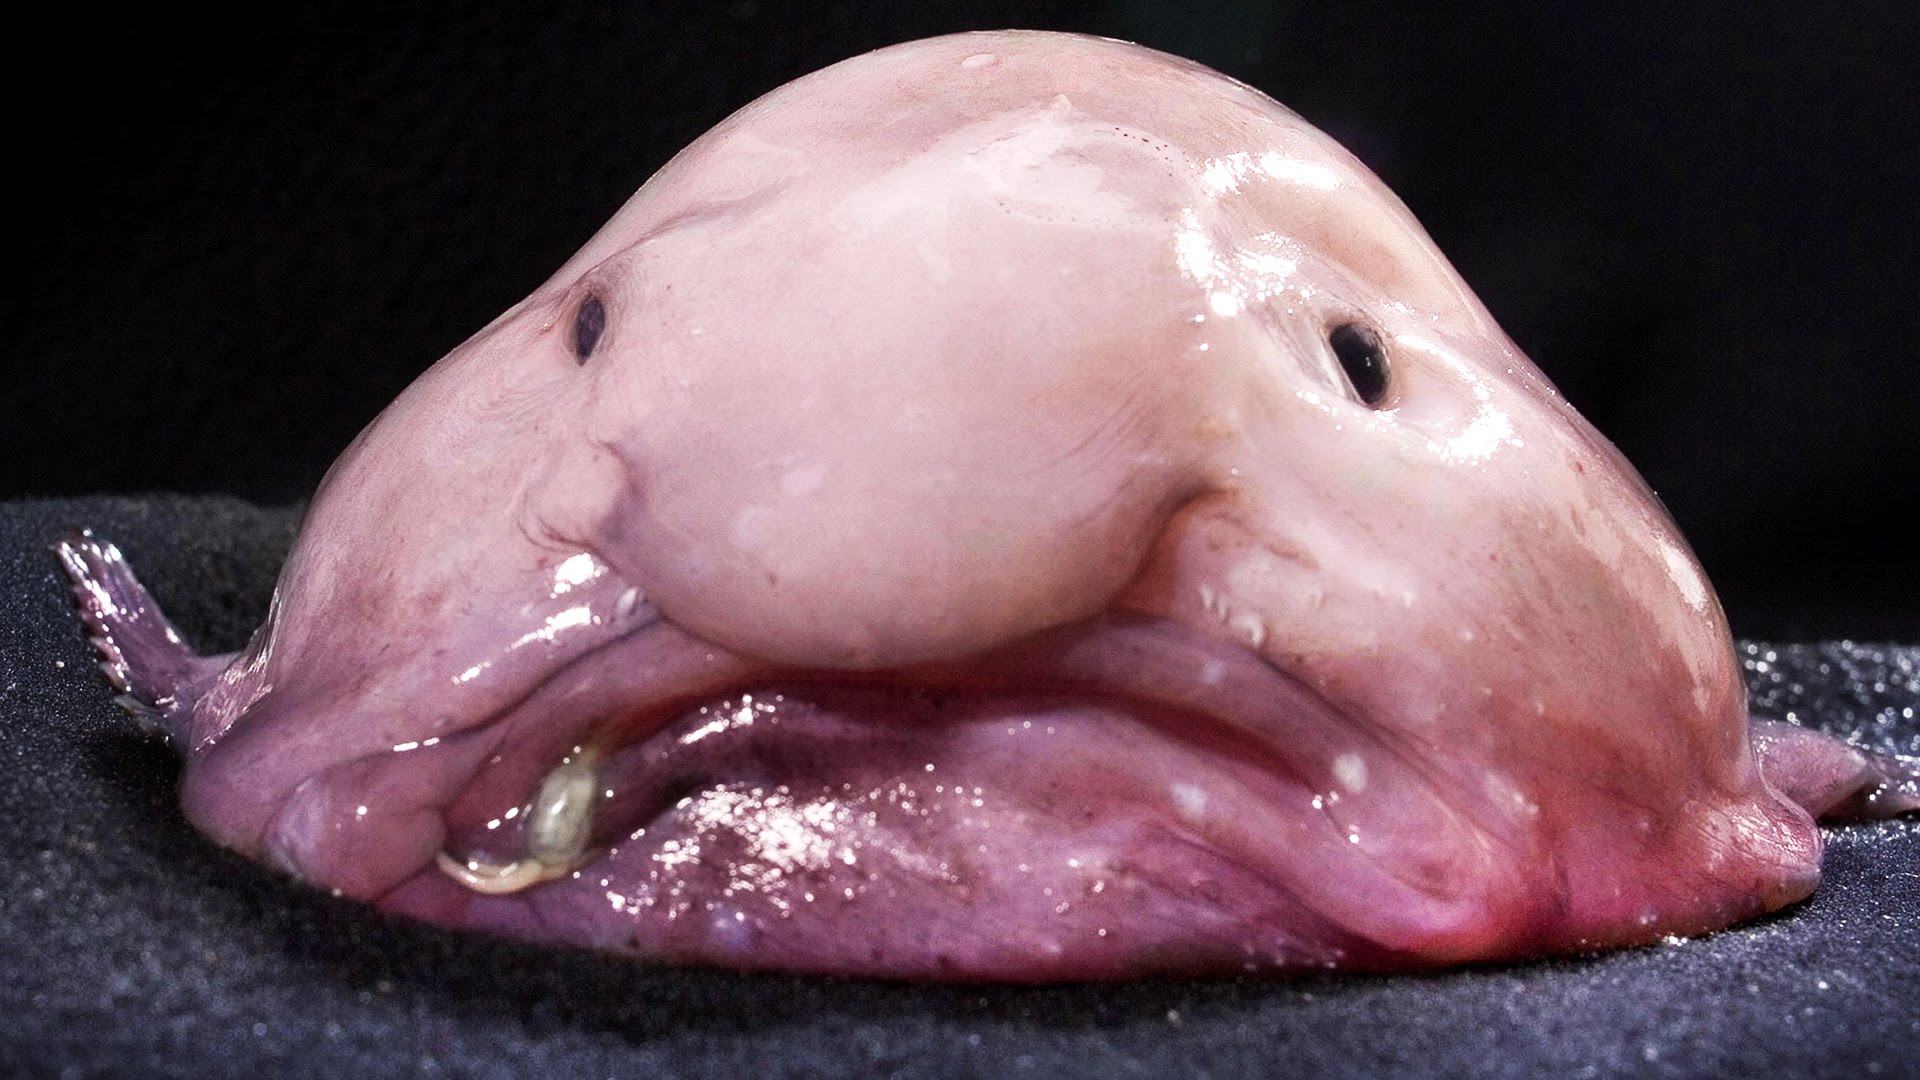 What Do Blobfish Look Like Out of the Water?